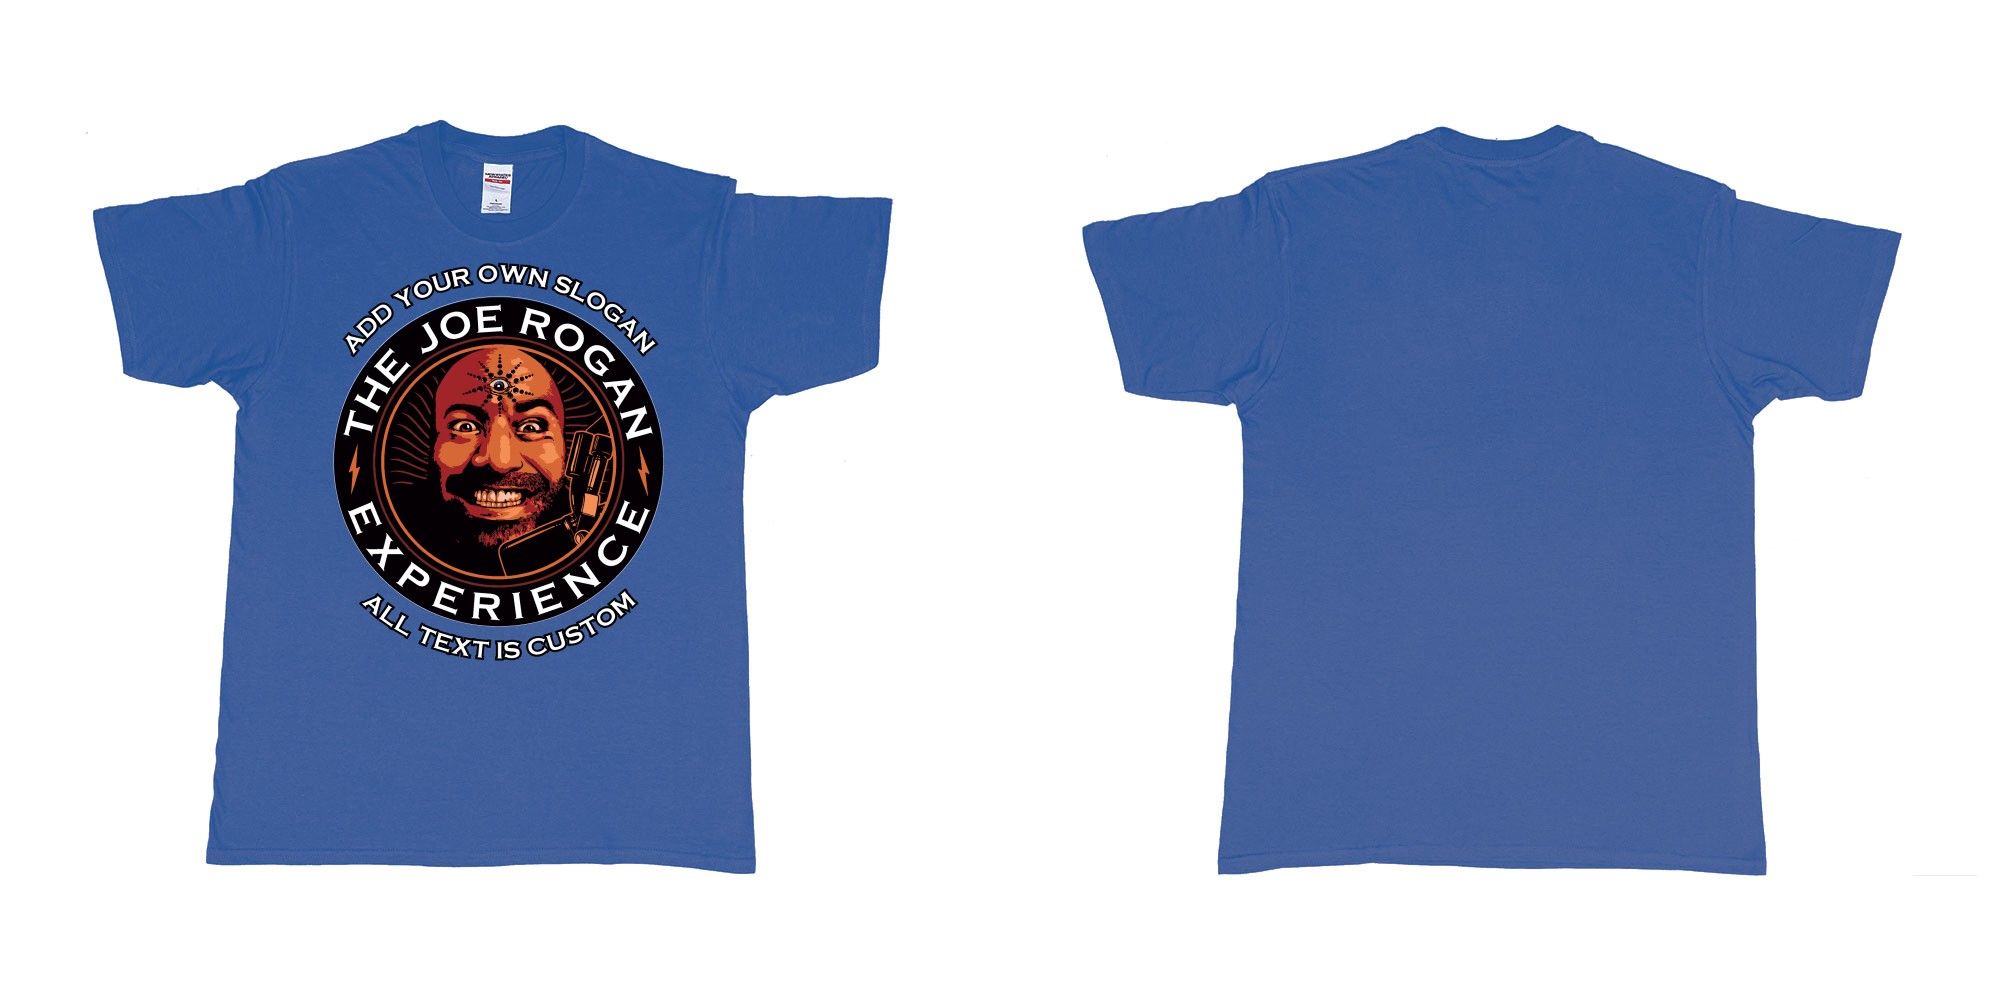 Custom tshirt design the joe rogan experience custom tshirt in fabric color royal-blue choice your own text made in Bali by The Pirate Way